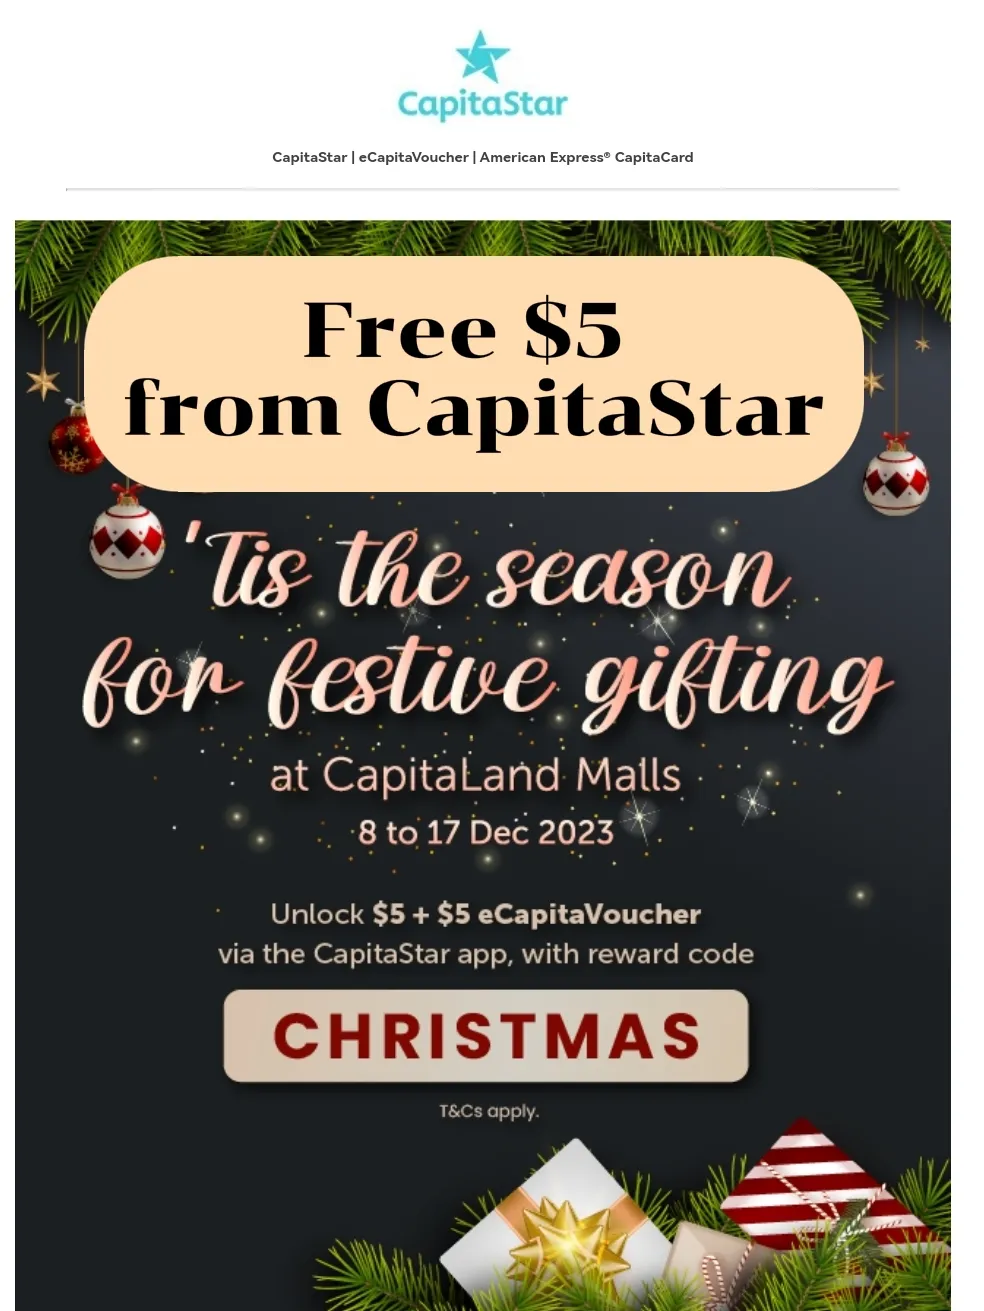 Free $5 from CapitaStar✨'s images(0)